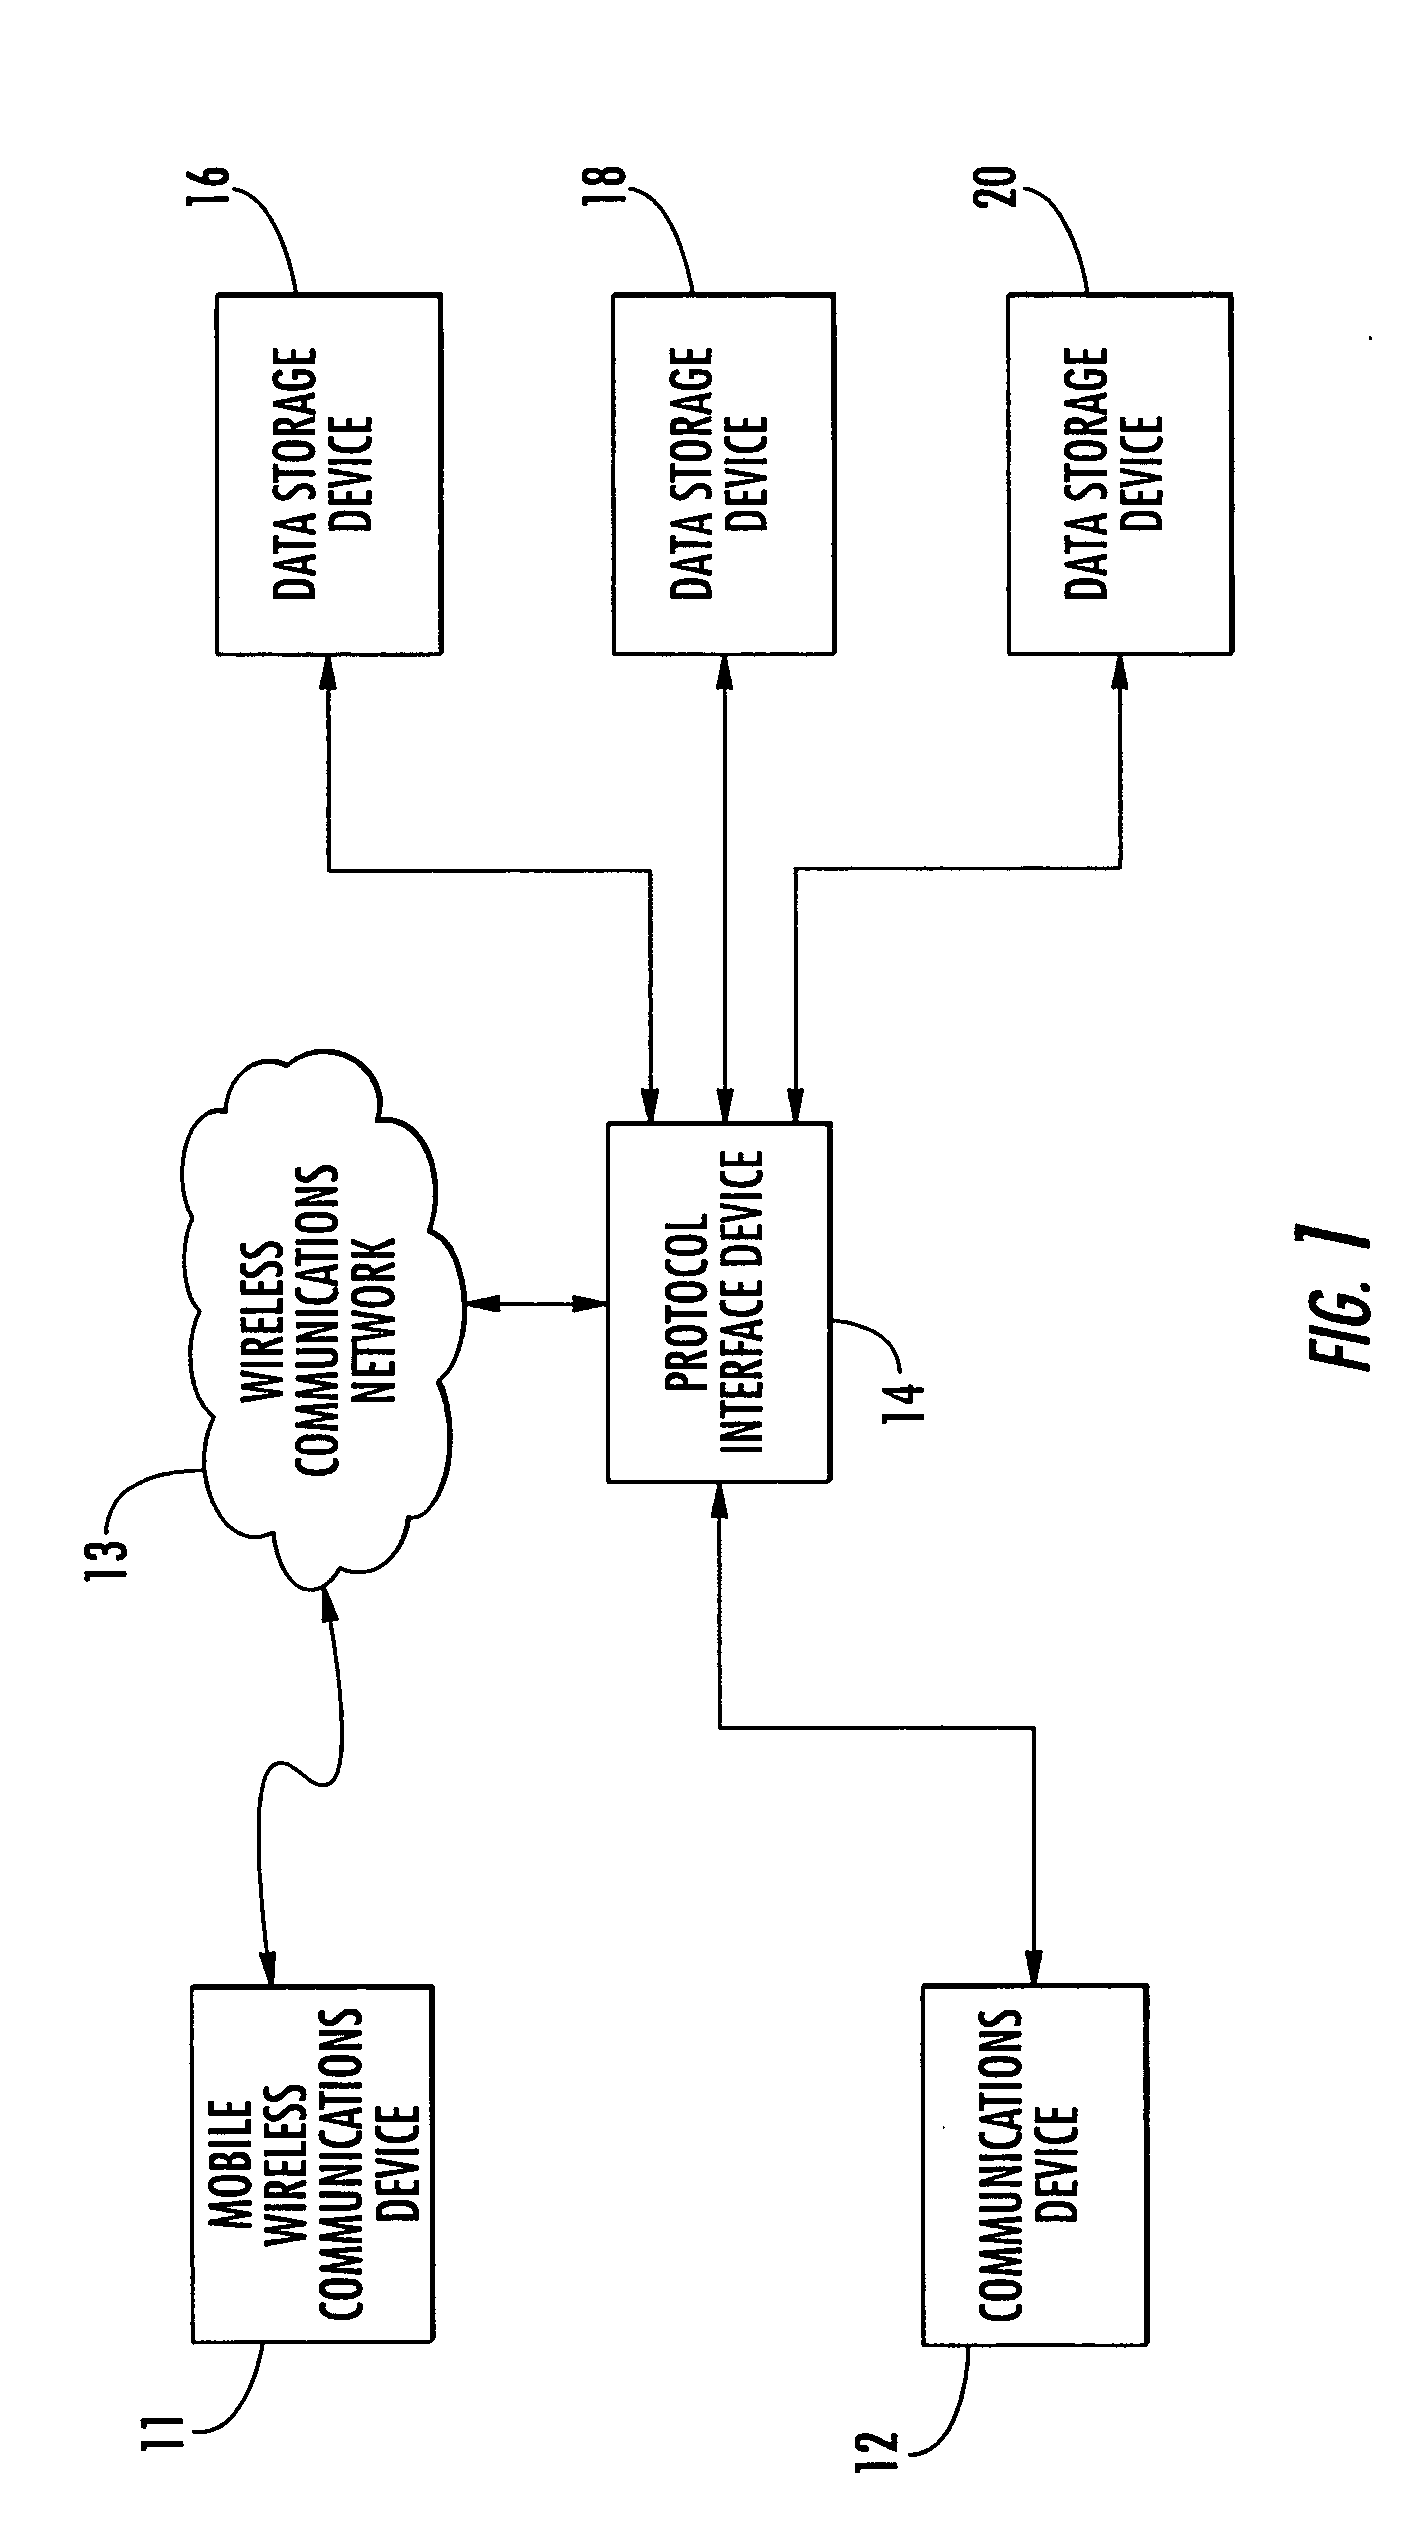 Communications system providing reduced access latency and related methods